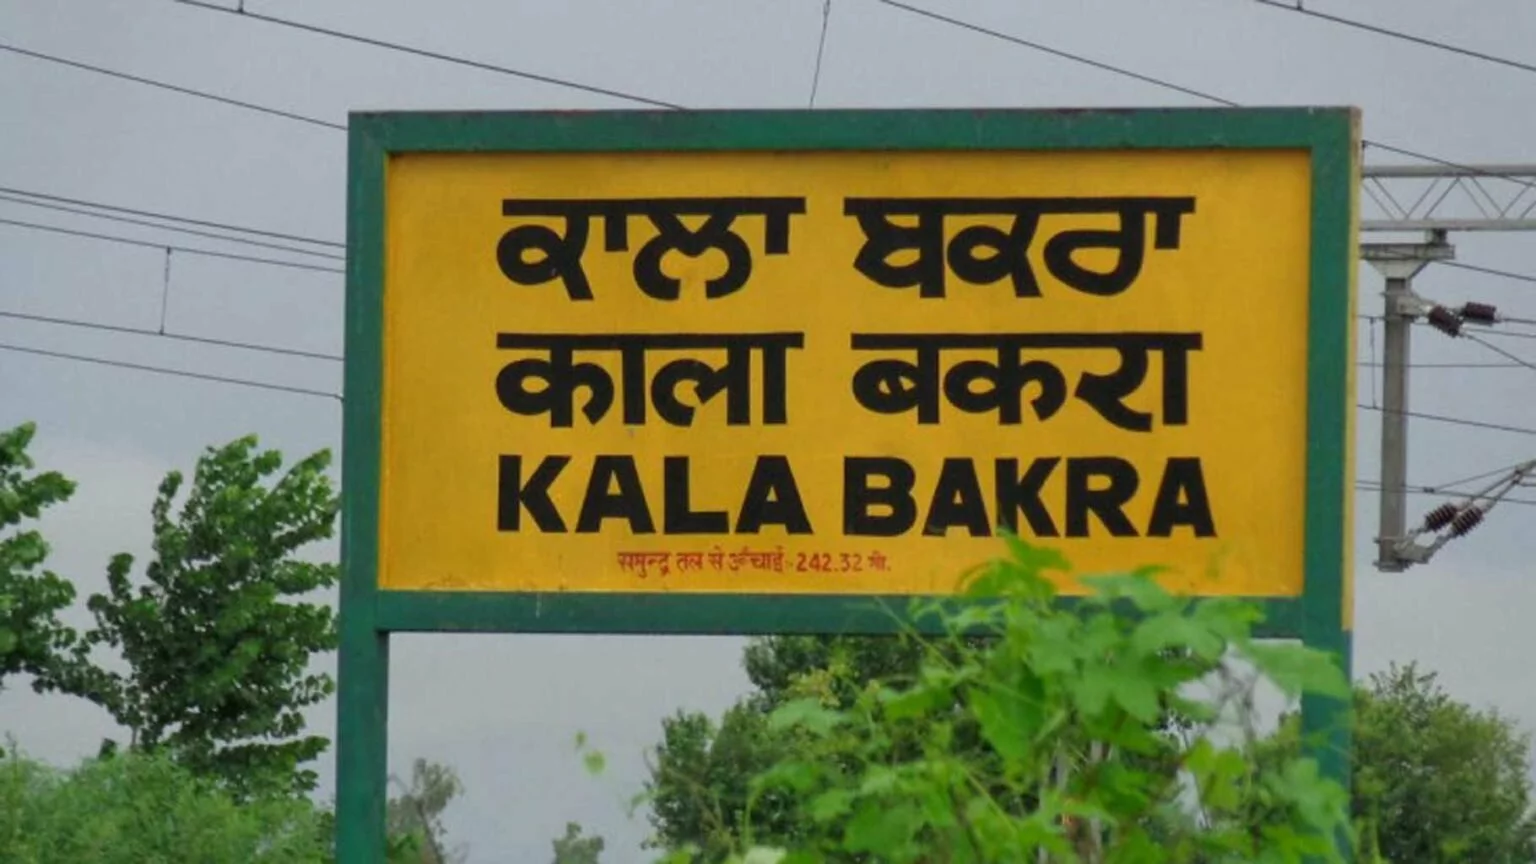 10 Indian Places With Very Funny Names